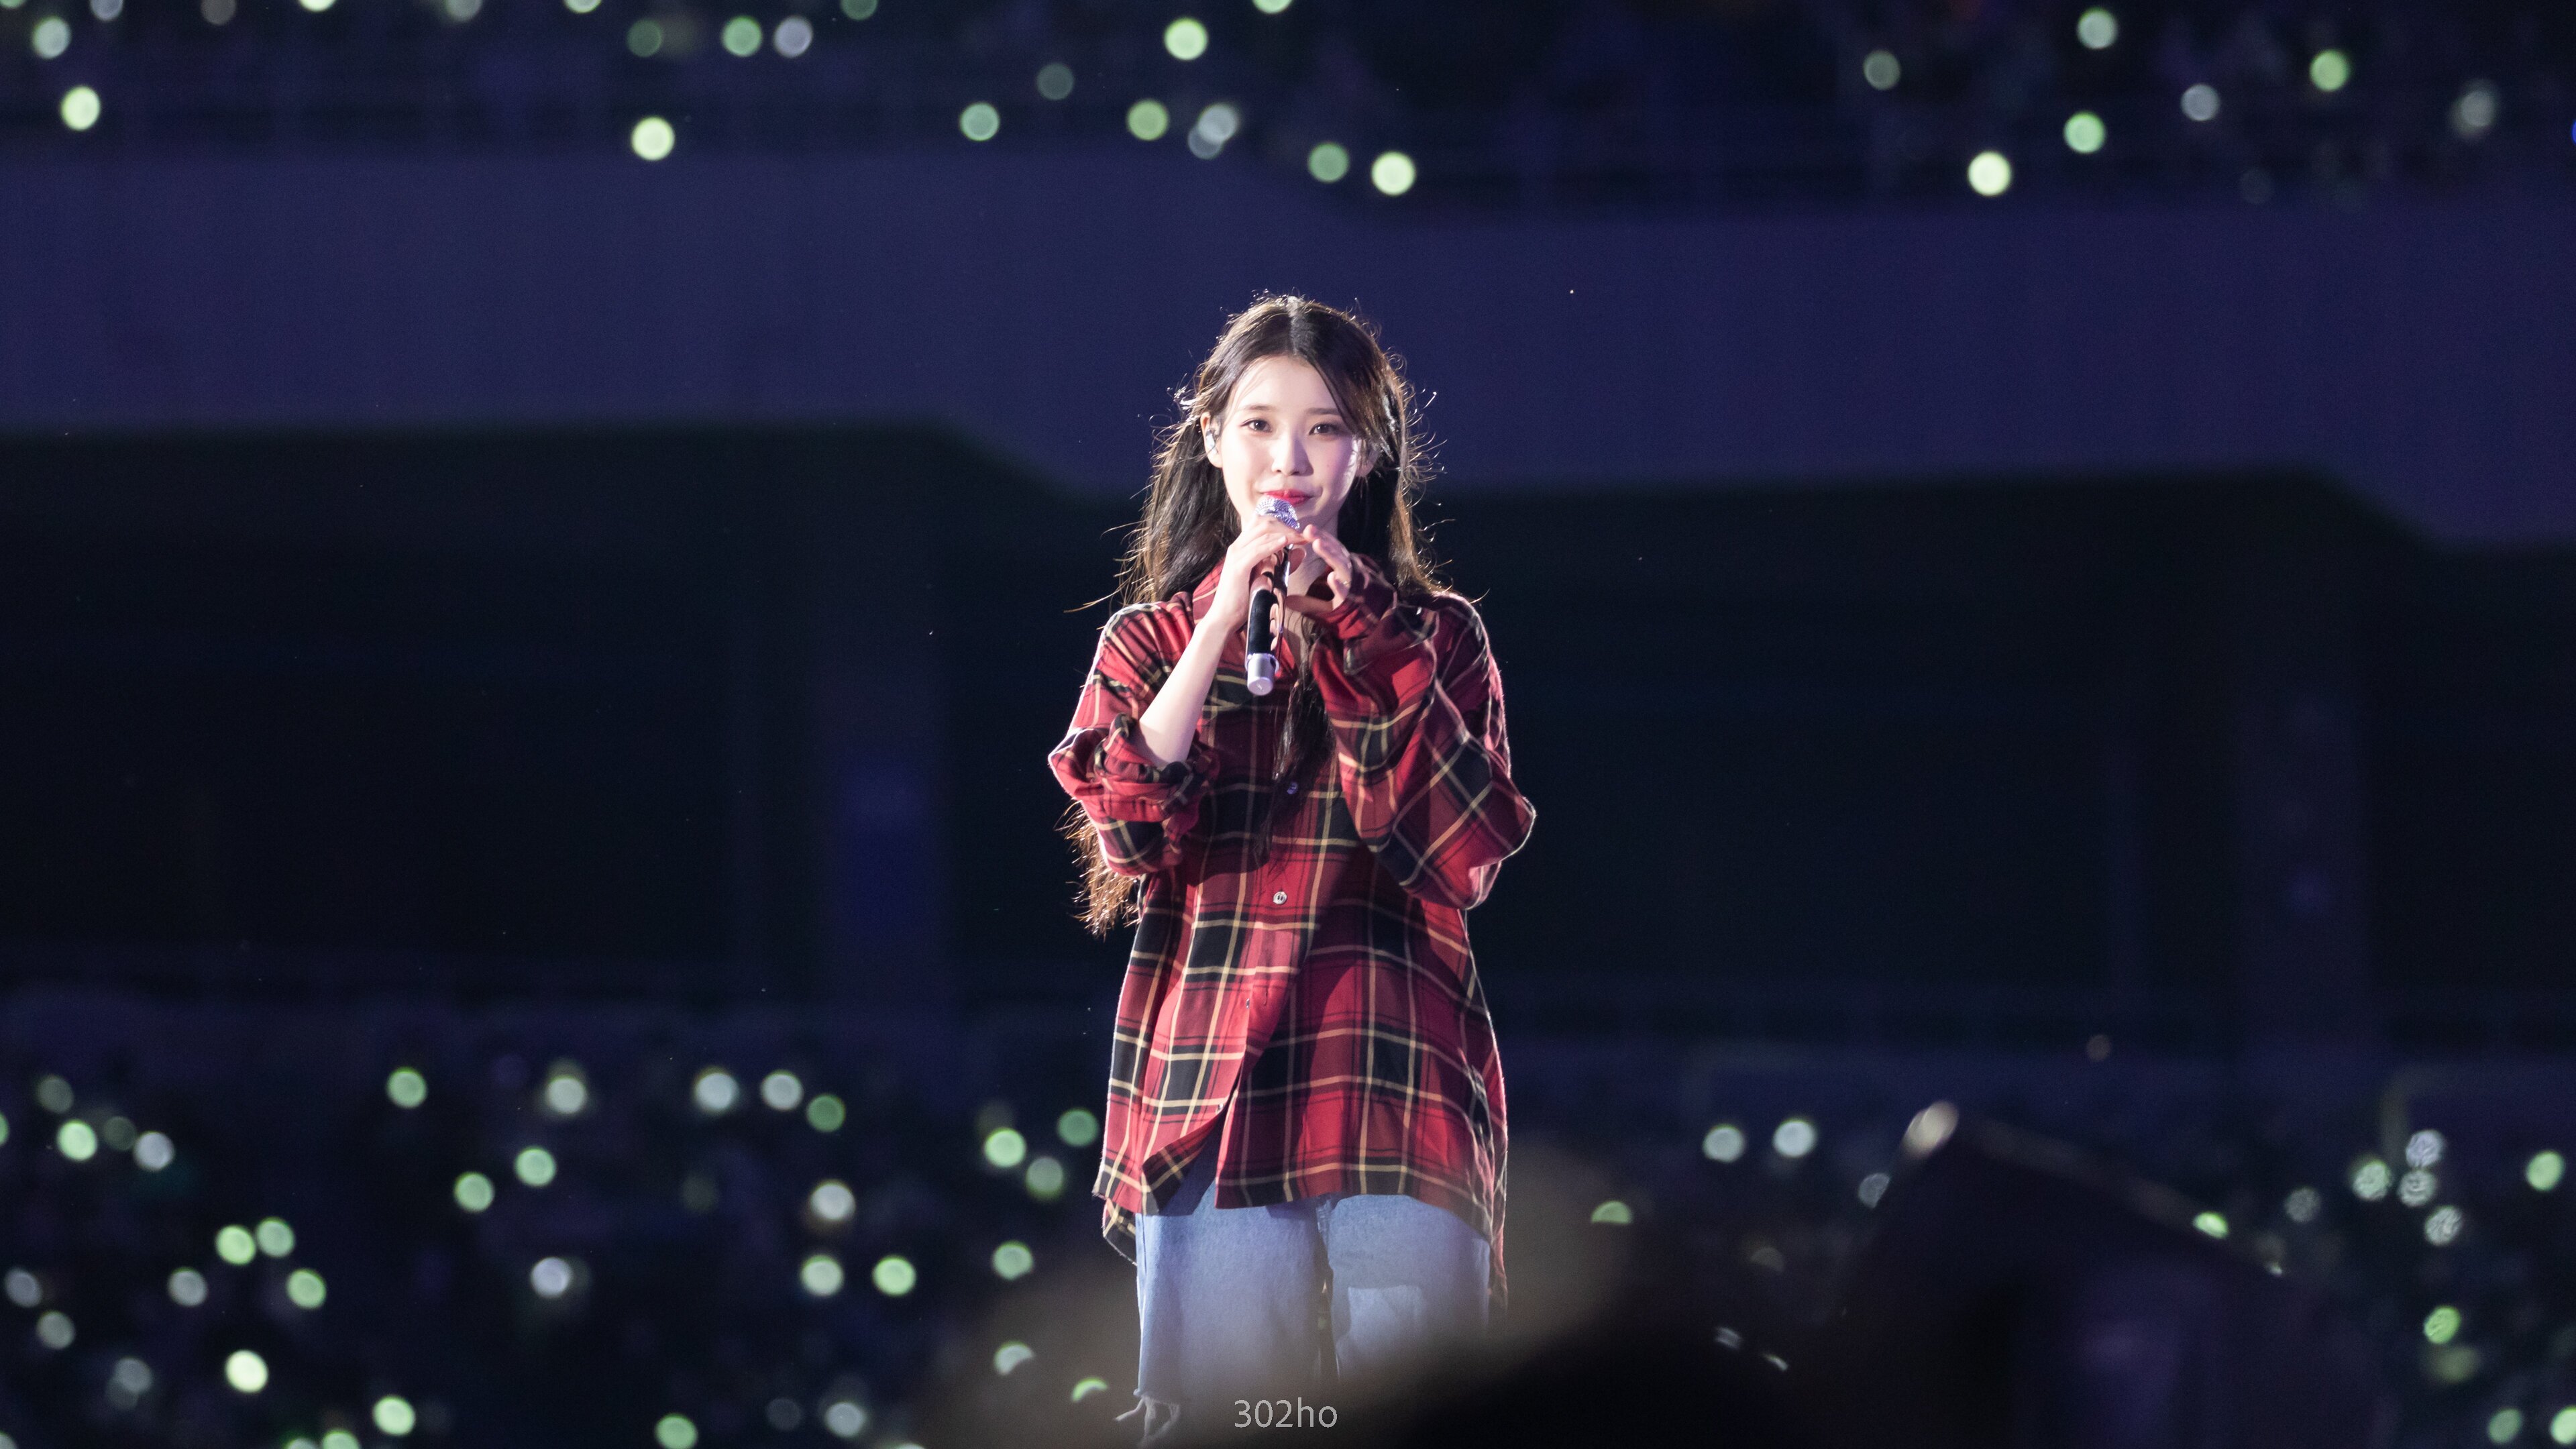 220918 IU - 'The Golden Hour' Concert | kpopping